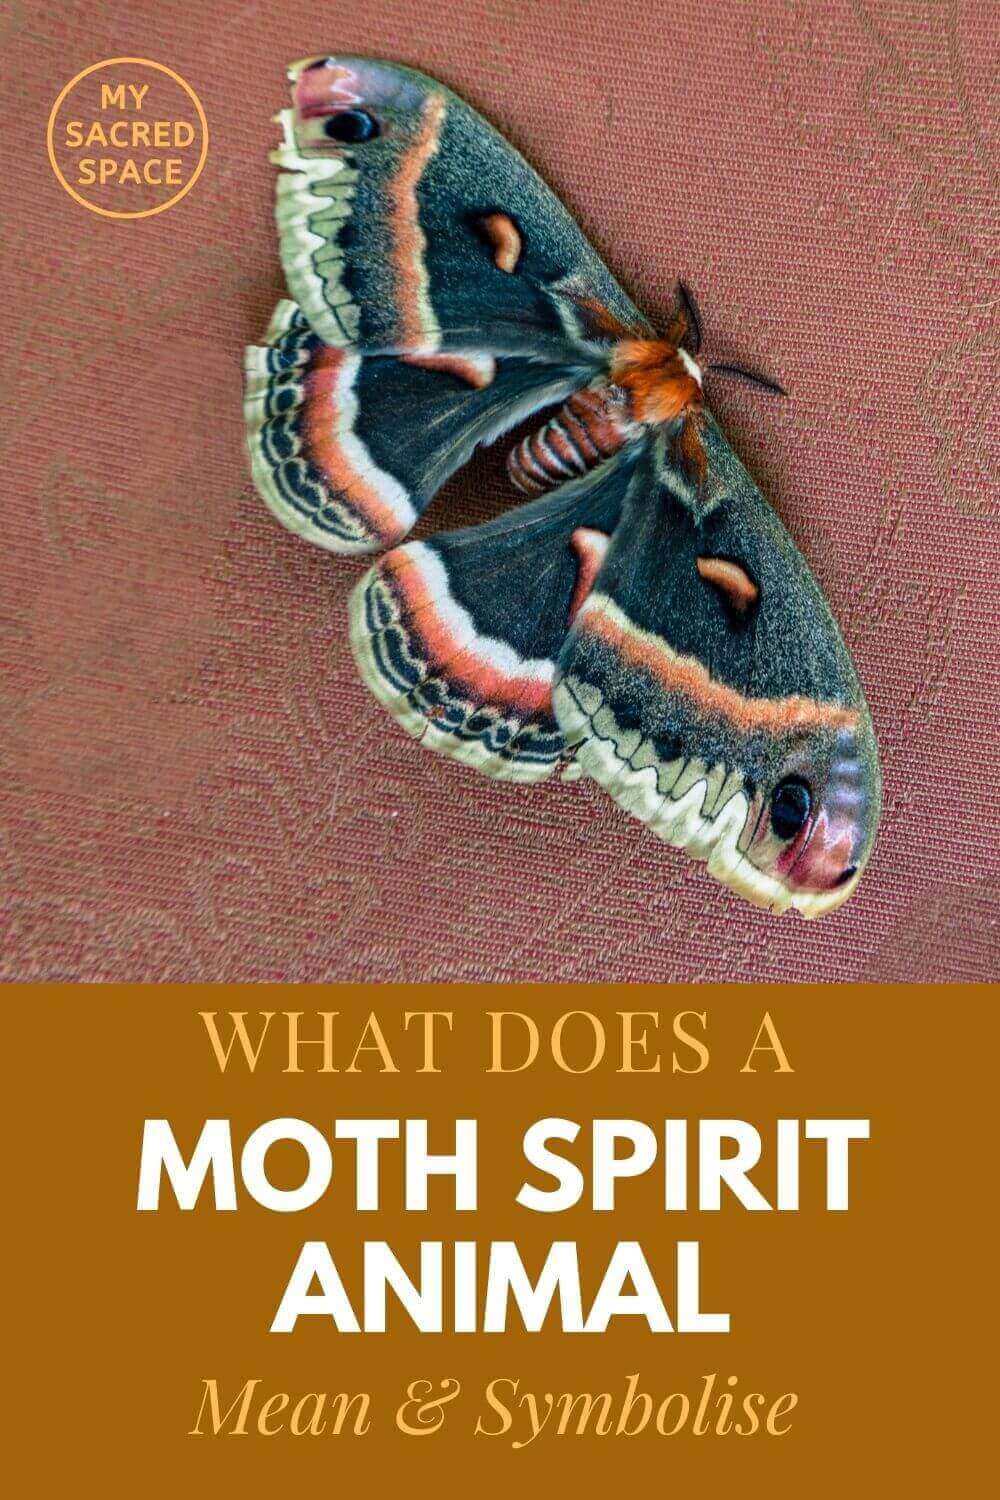 what does a moth spirit animal mean and symbolise